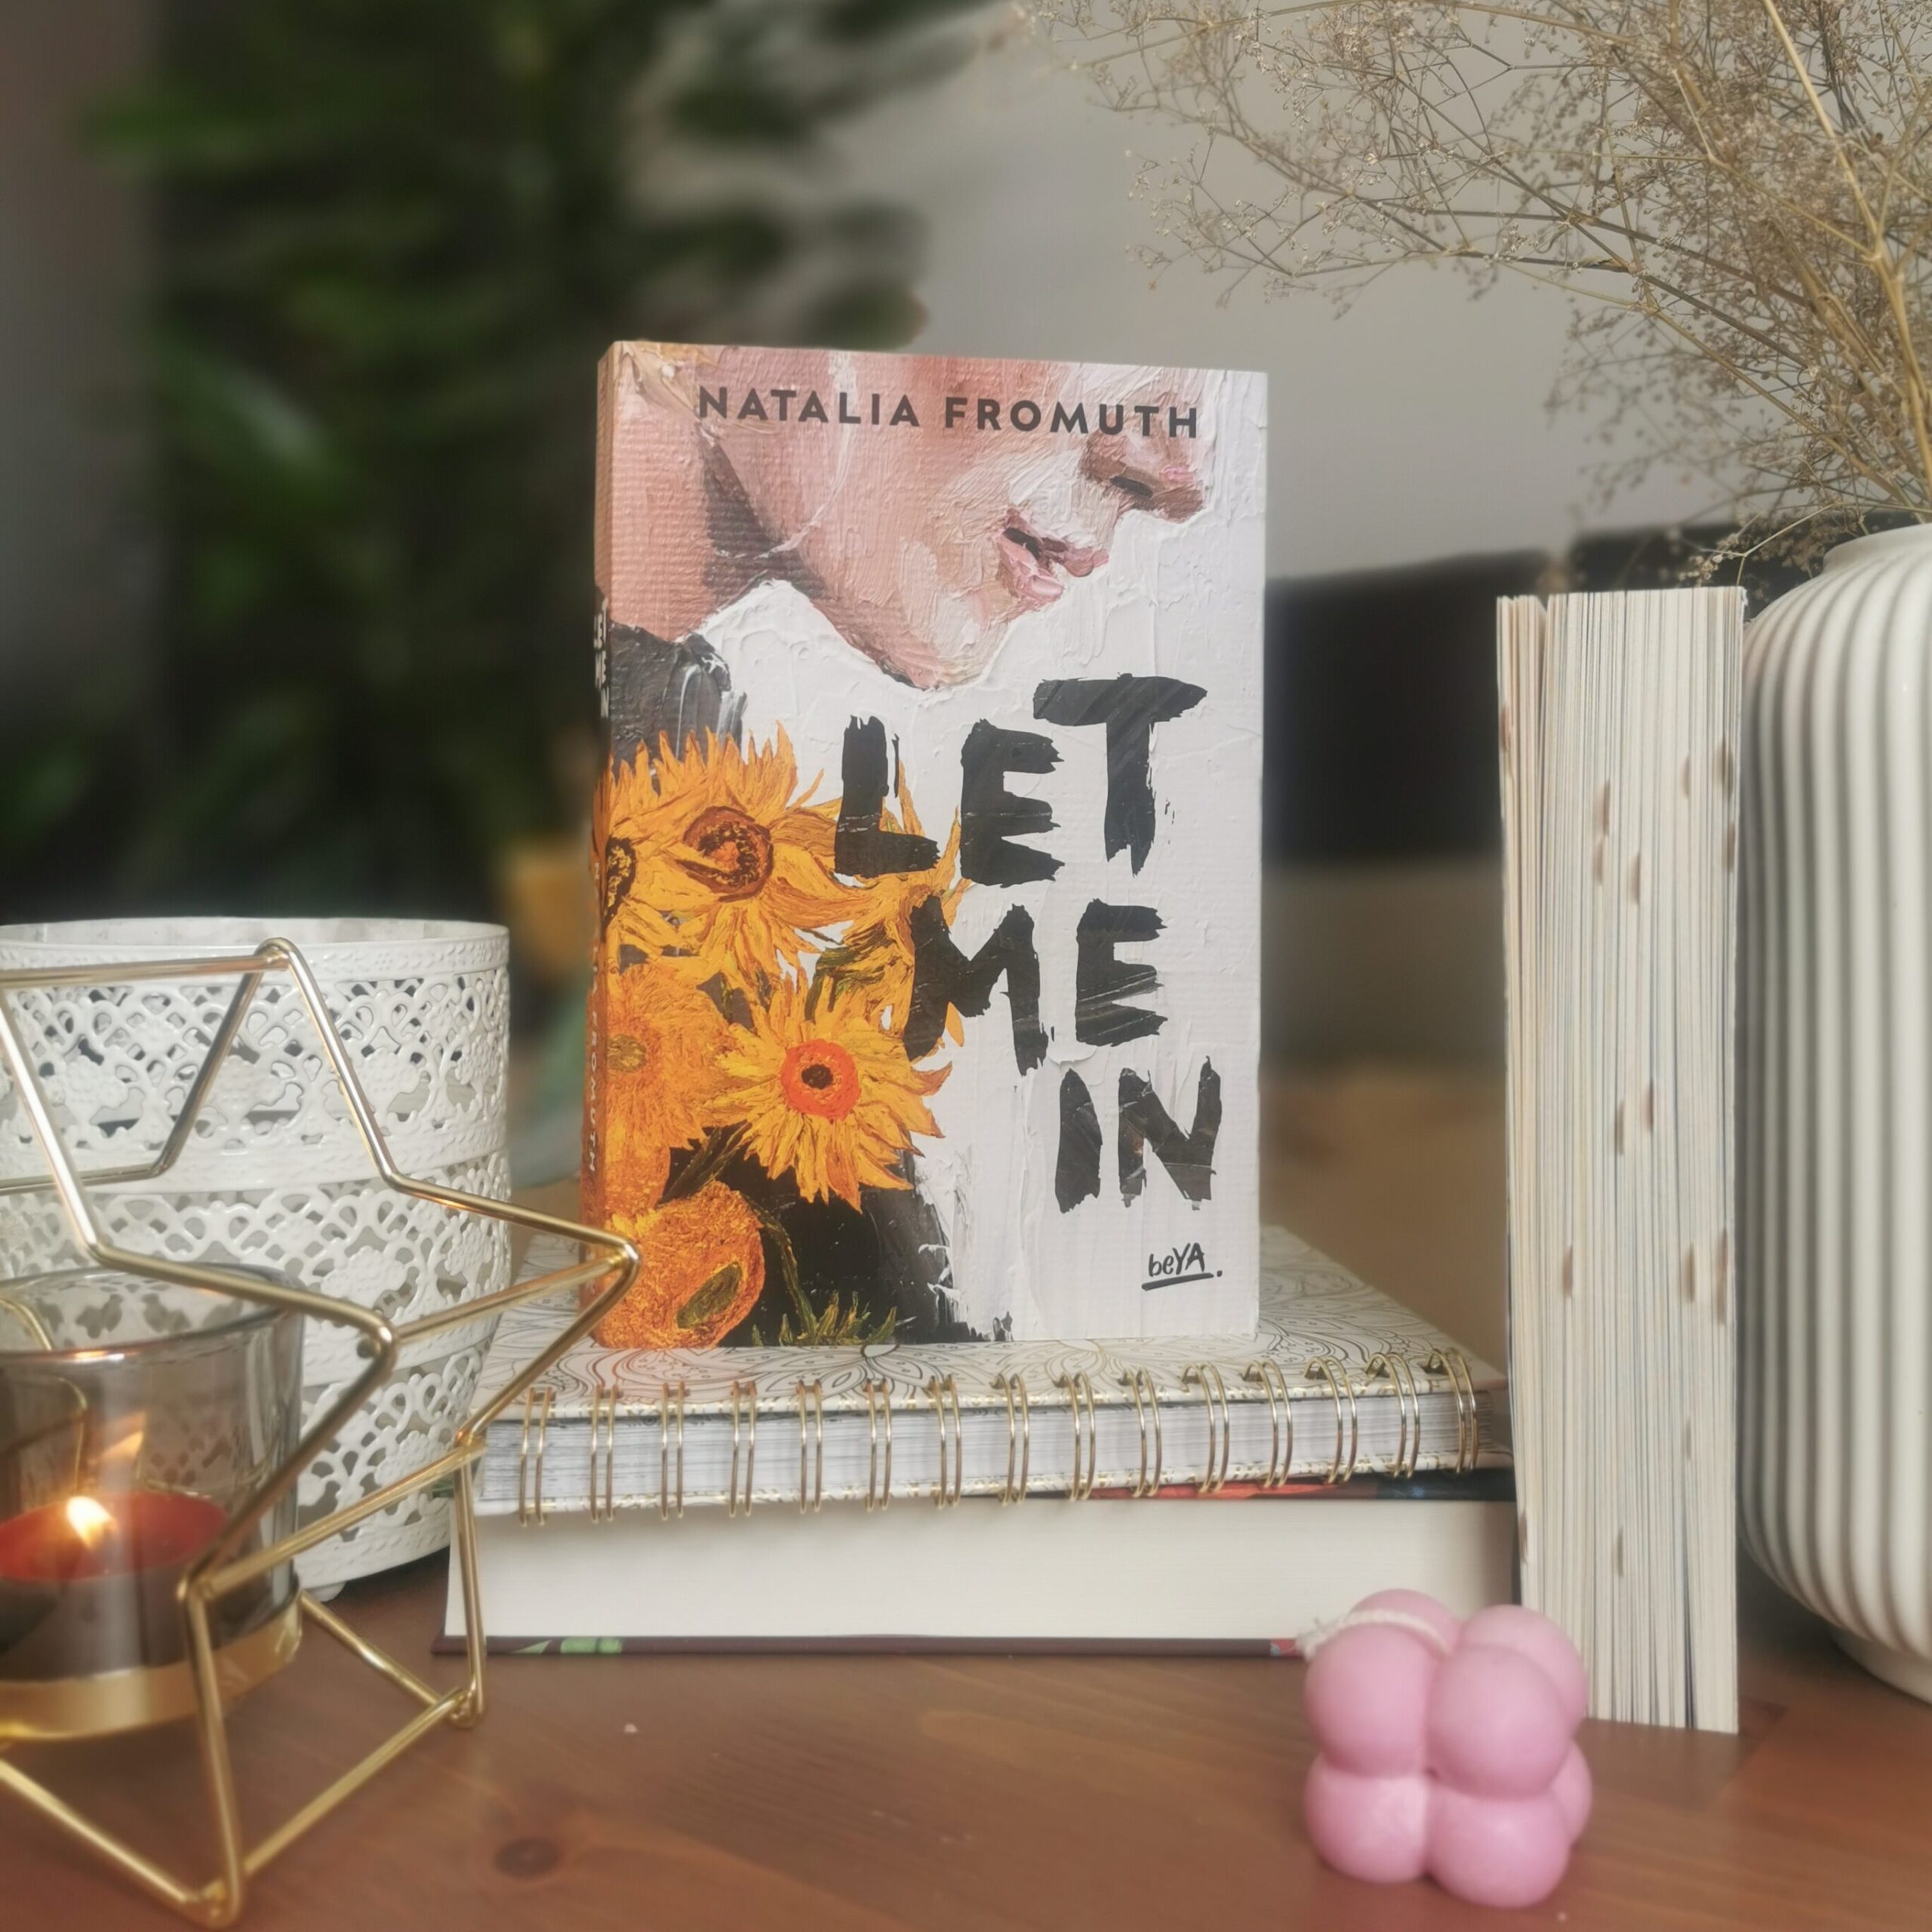 Recenzja: Let me in - Nataia Fromuth